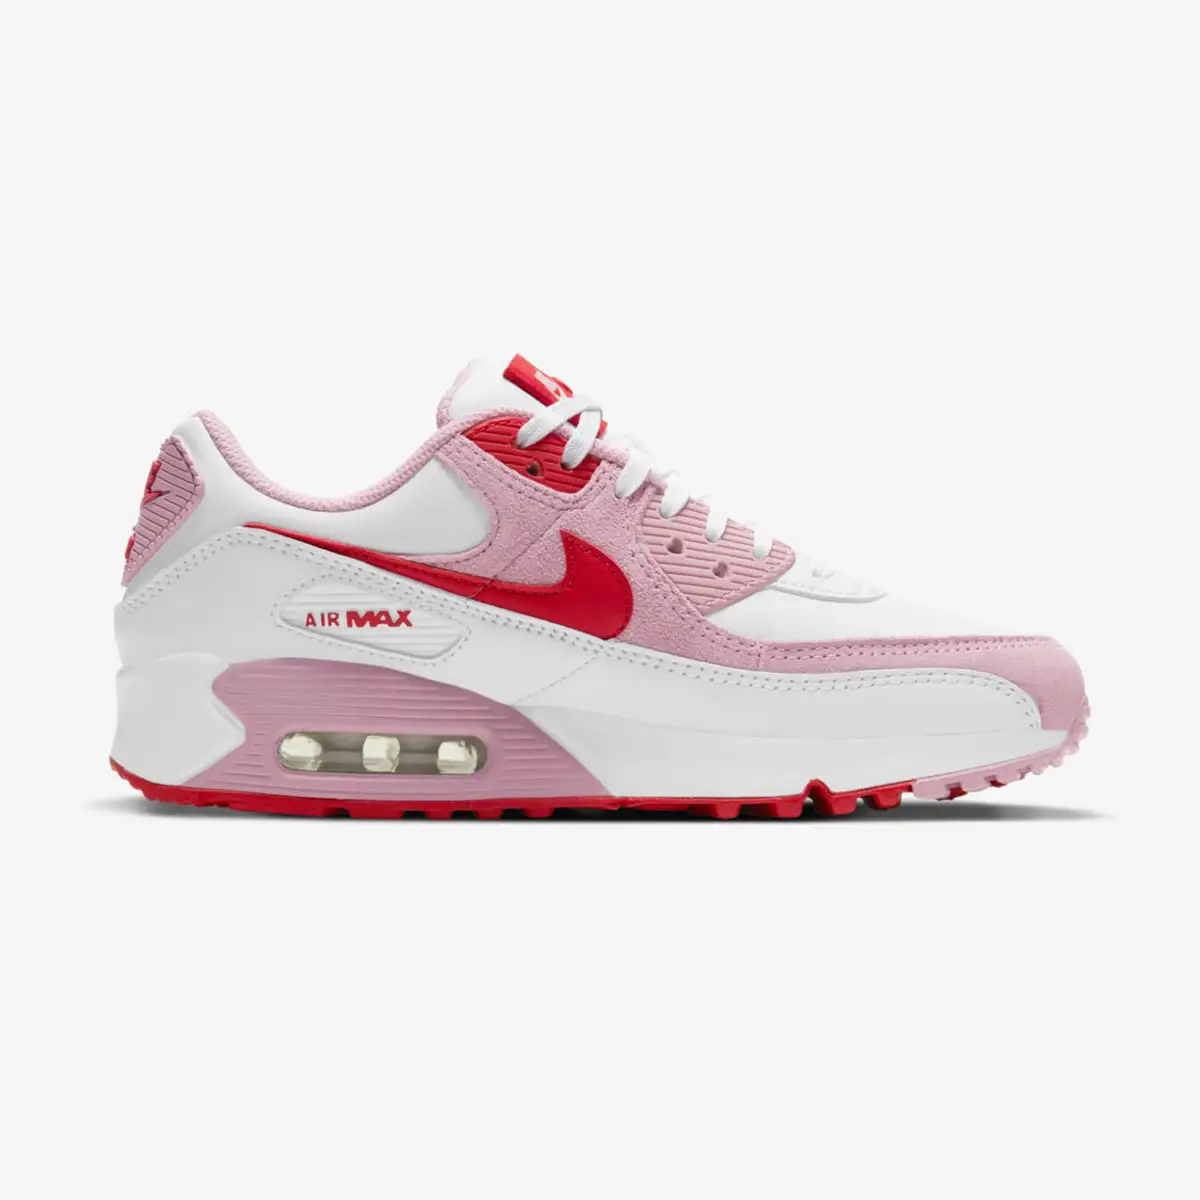 Nike valentines day sneakers air max 90